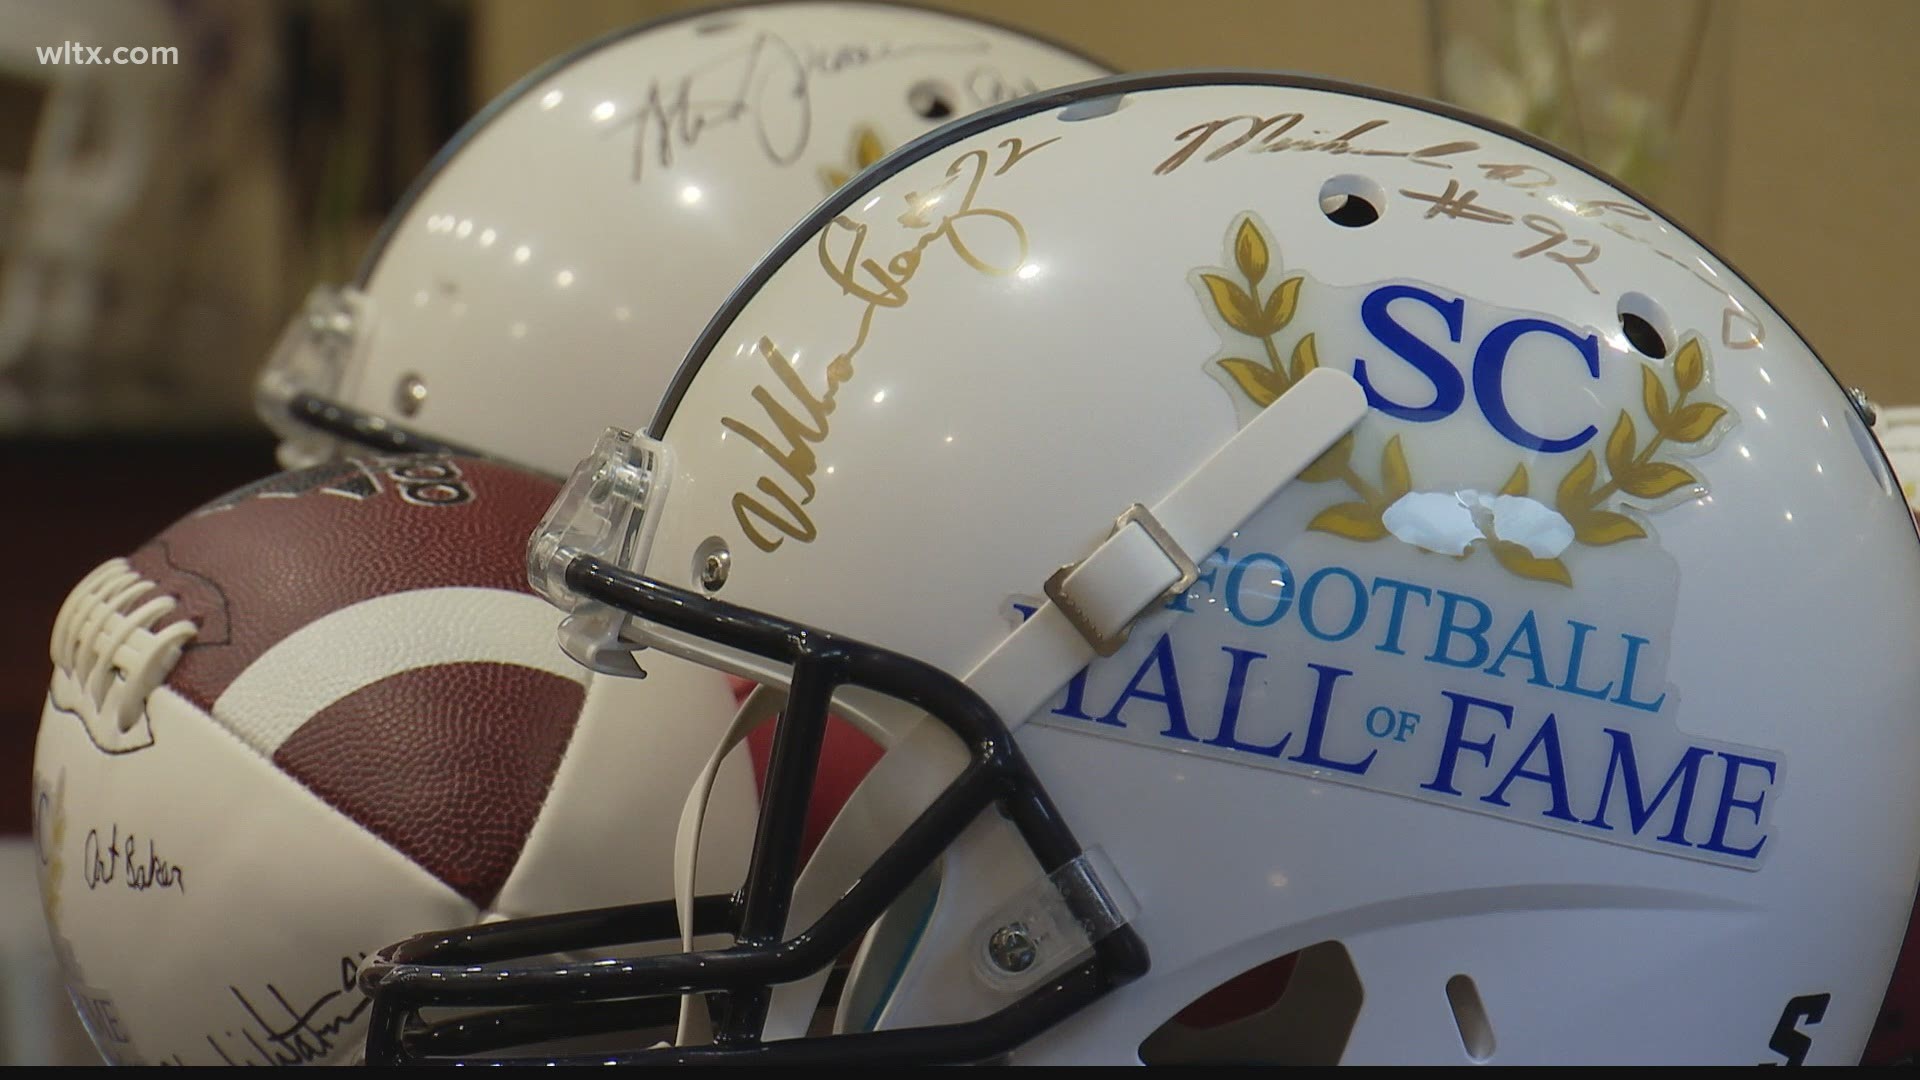 Steve Spurrier and Robert Porcher are inducted into the South Carolina Football Hall of Fame while UofSC running back Kevin Harris receives a prestigious award